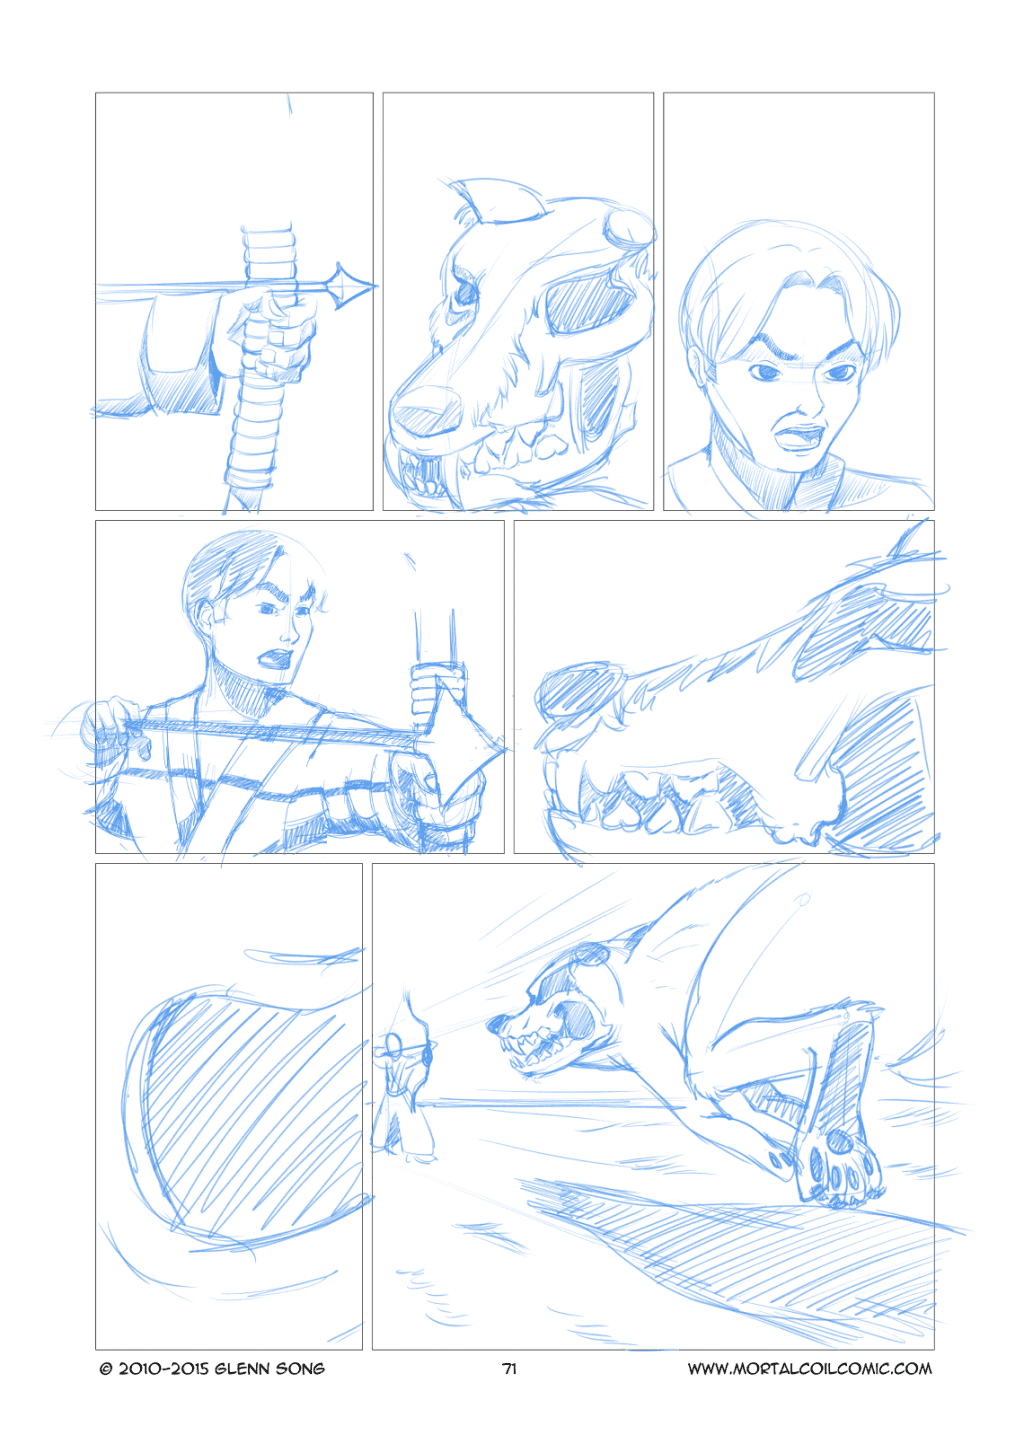 Archer of the West - 2 Pencils